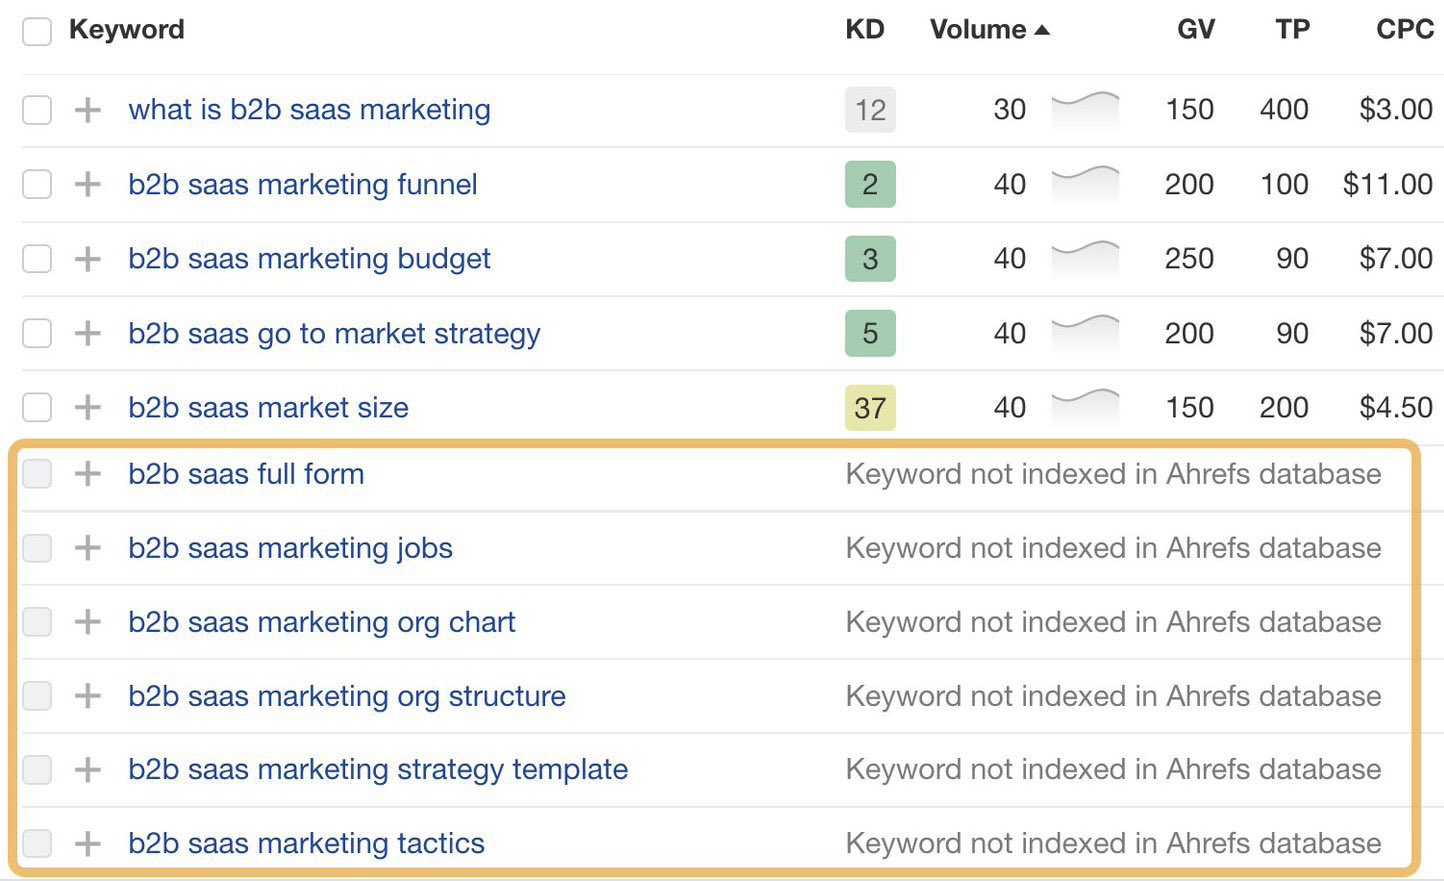 Keywords not indexed in our database now added to search suggestions report